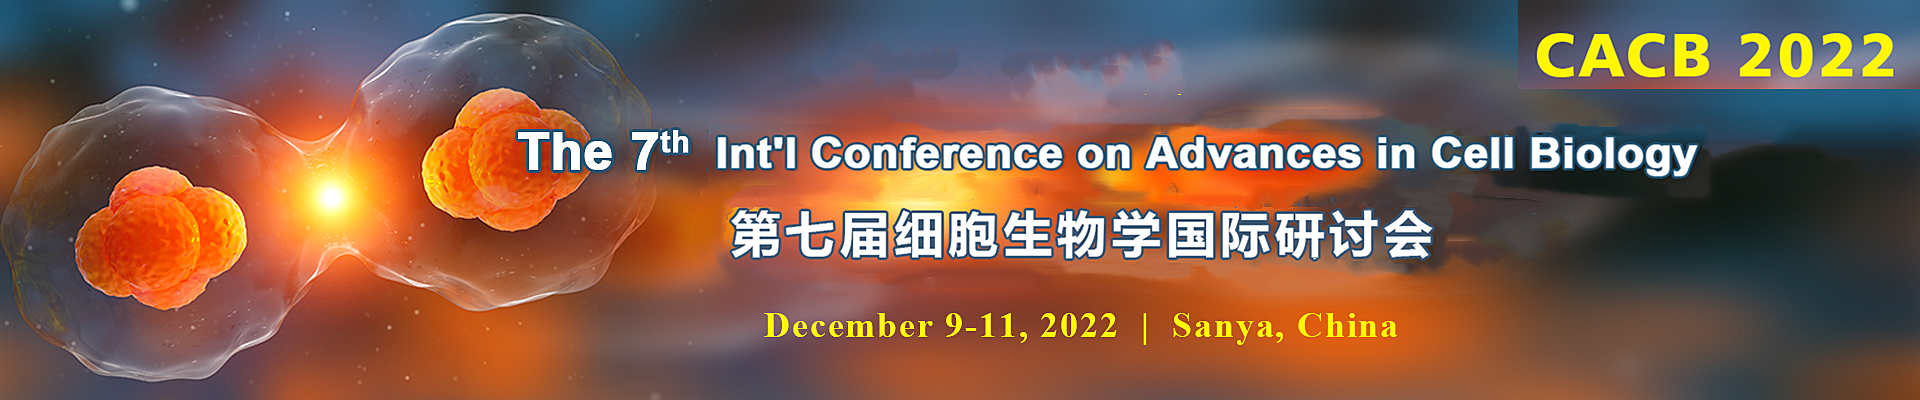 The 7th Int'l Conference on Advances in Cell Biology (CACB 2022), Online Event